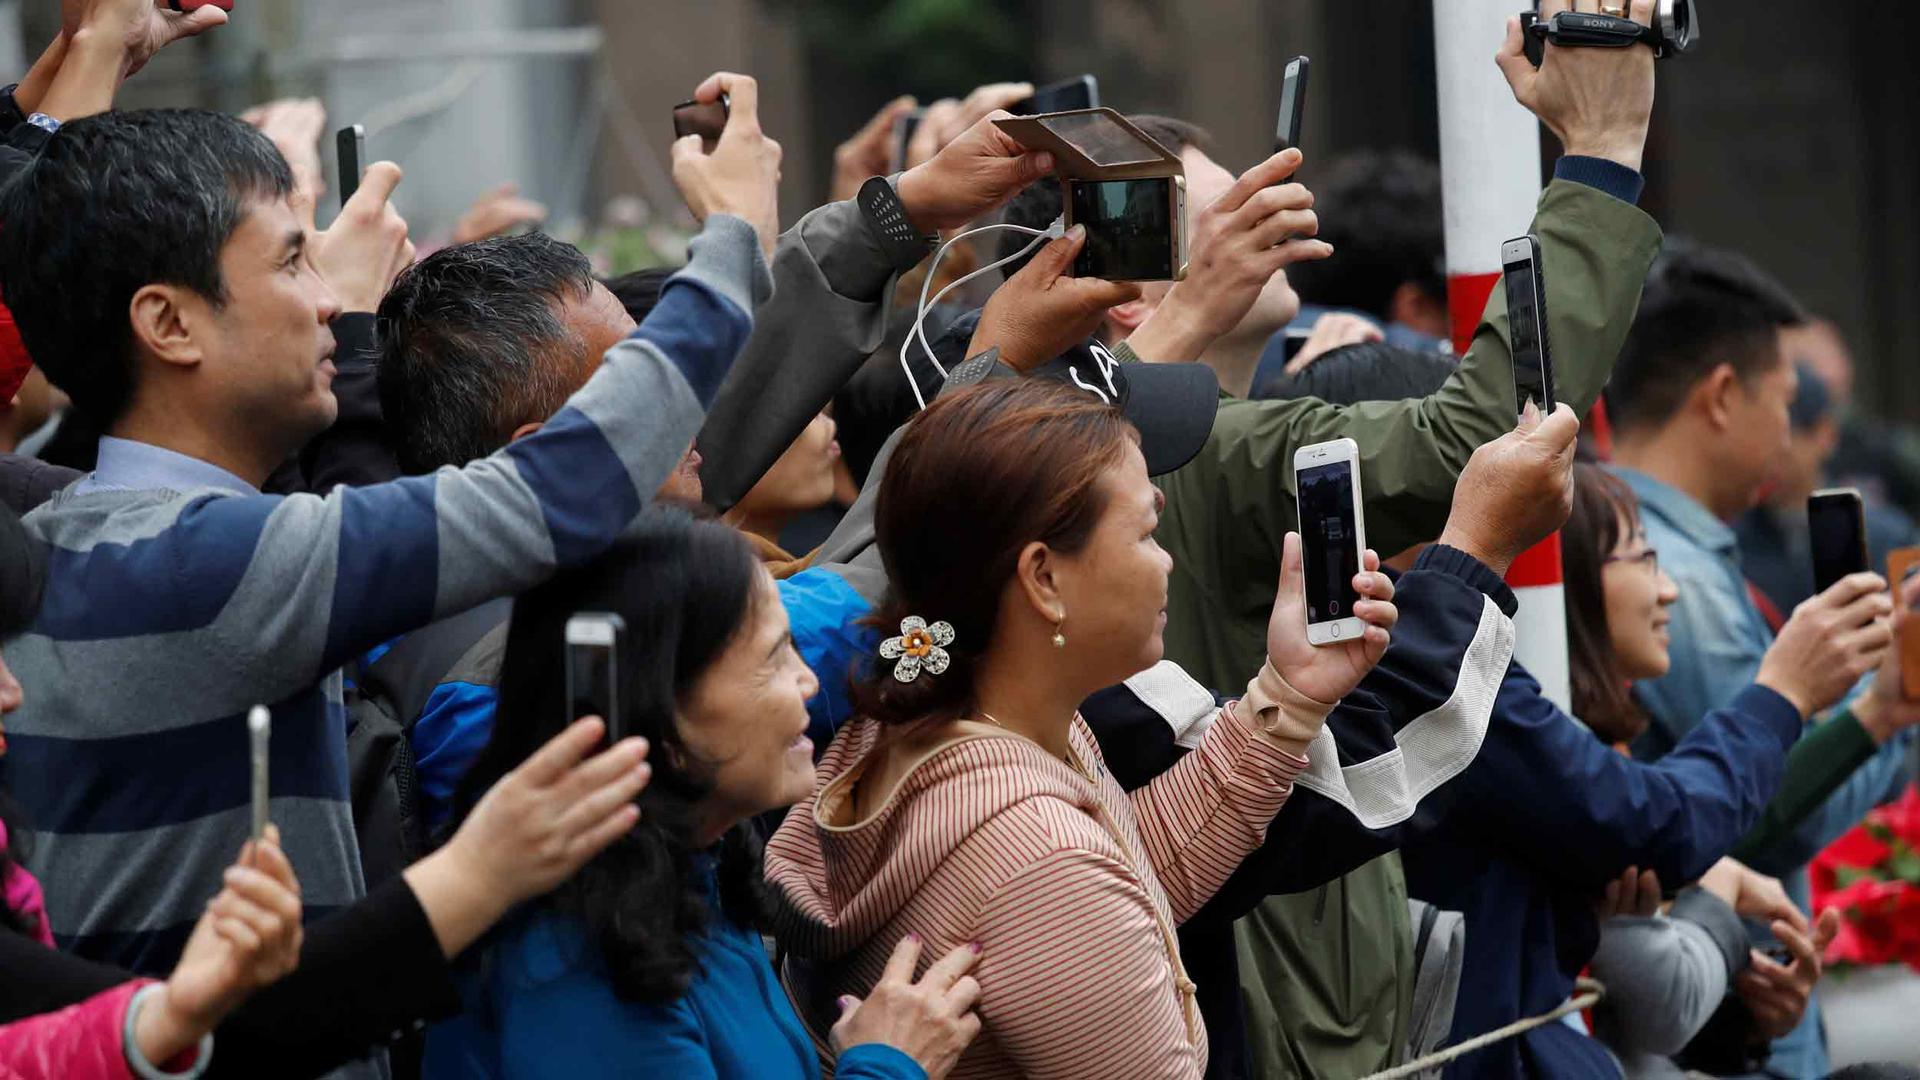 A crowd of people hold phones and cameras to take pictures as the motorcade carrying Kim Jong-un passes by